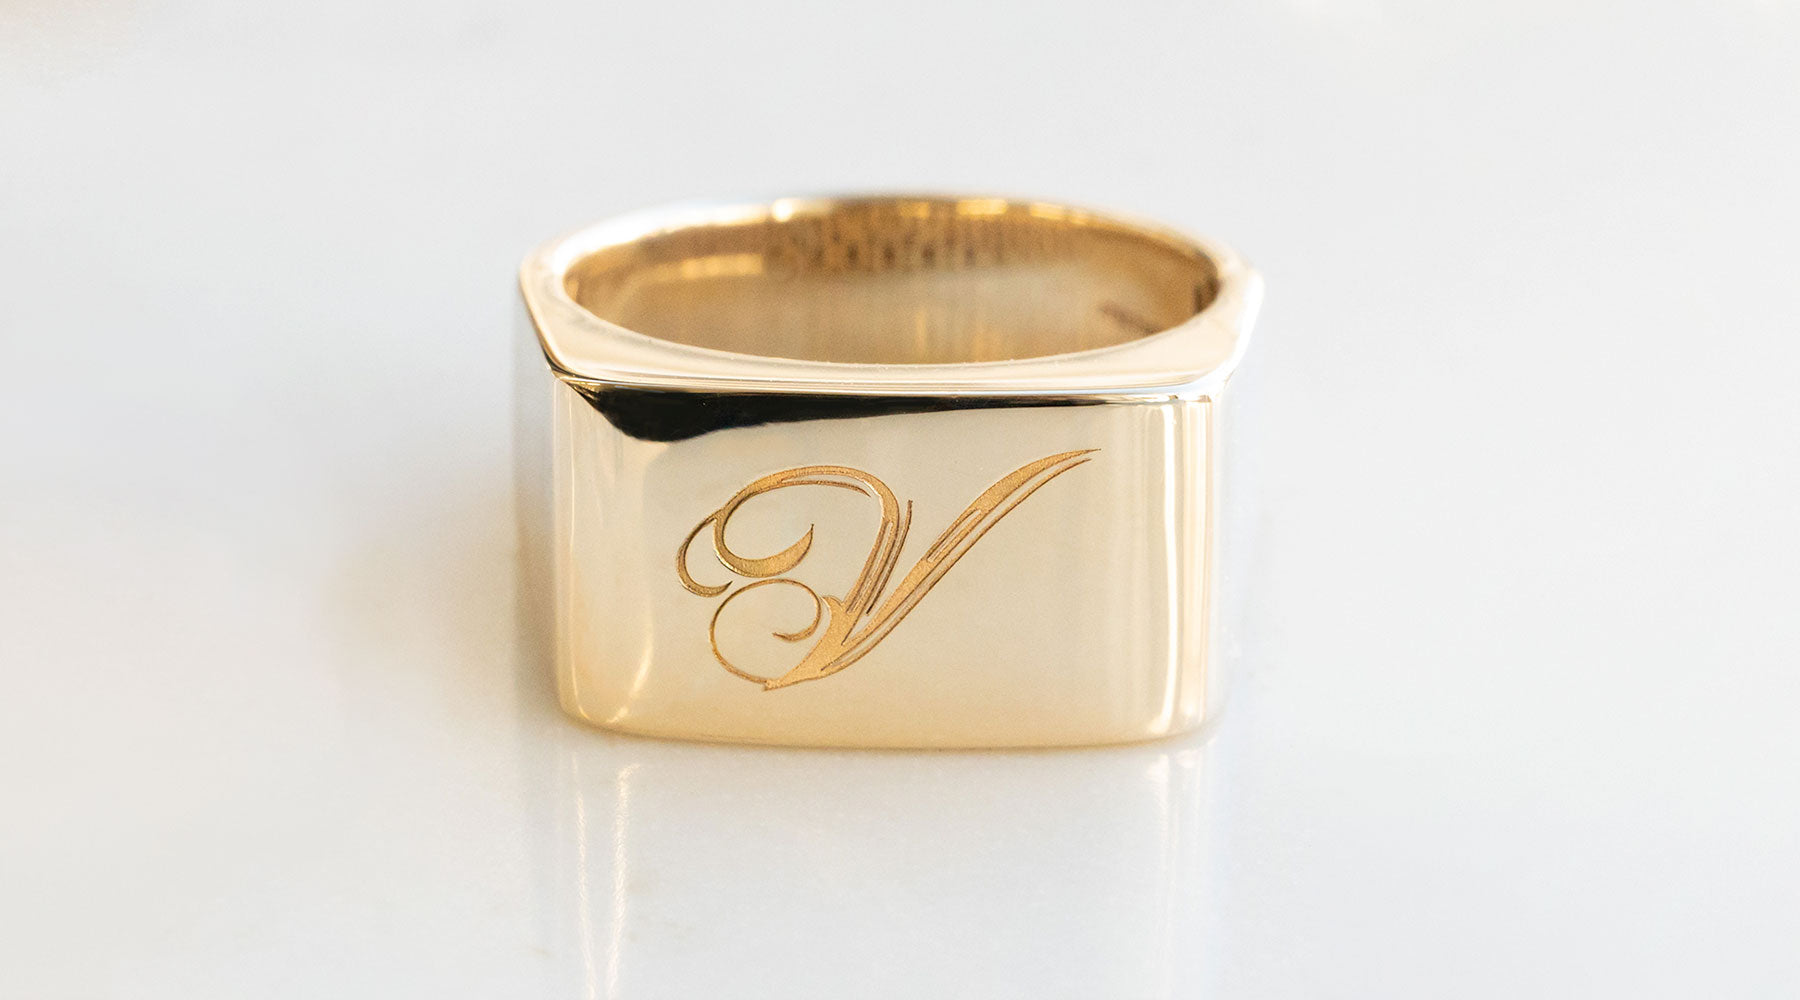 Custom Signet Rings: Designing Personalized Heirlooms with Gold, Platinum, and Gemstones